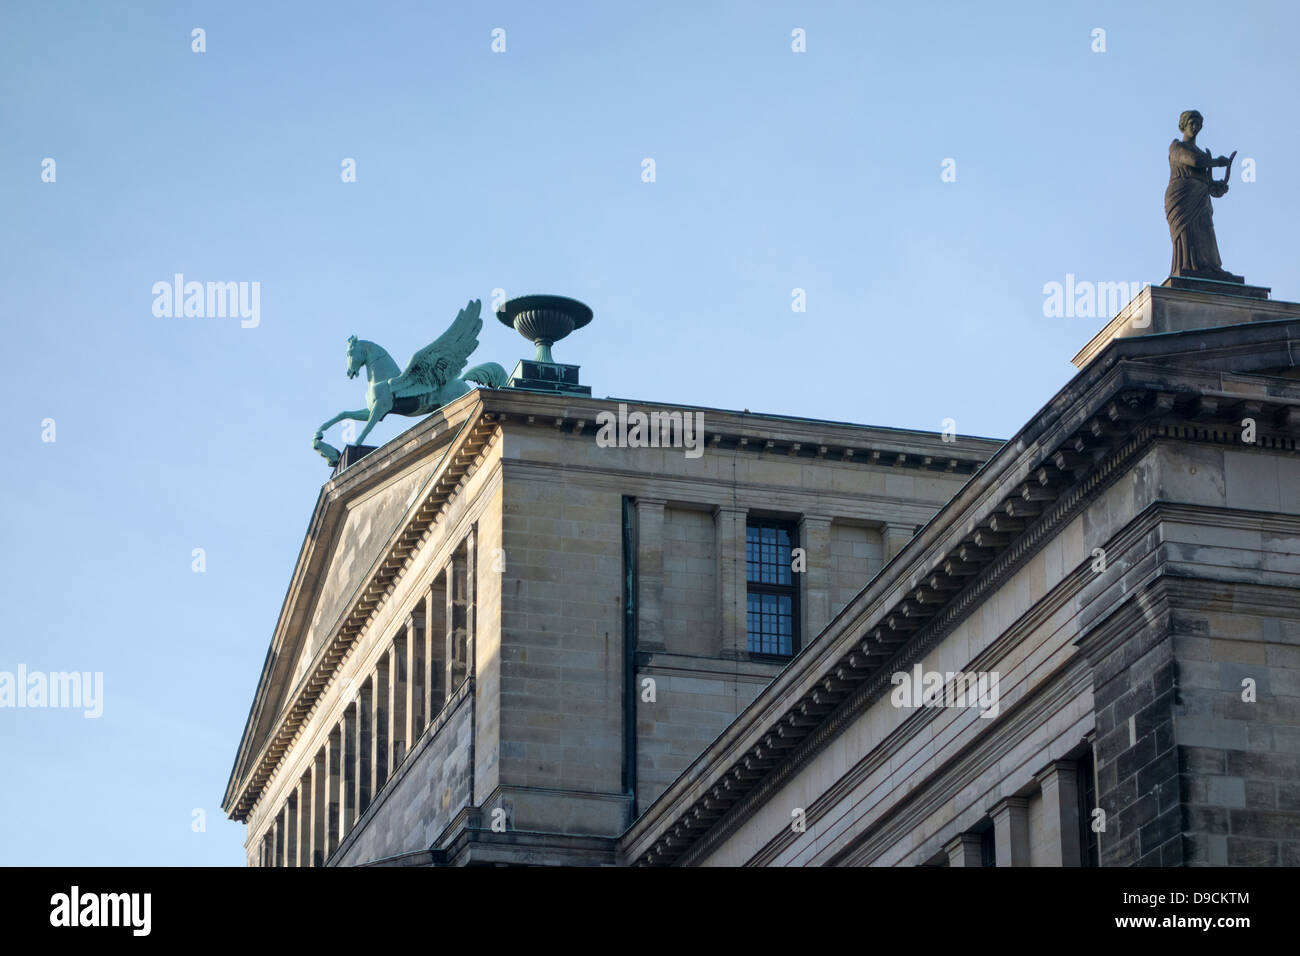 detail of facade of the Konzerthaus, Berlin, Germany Stock Photo